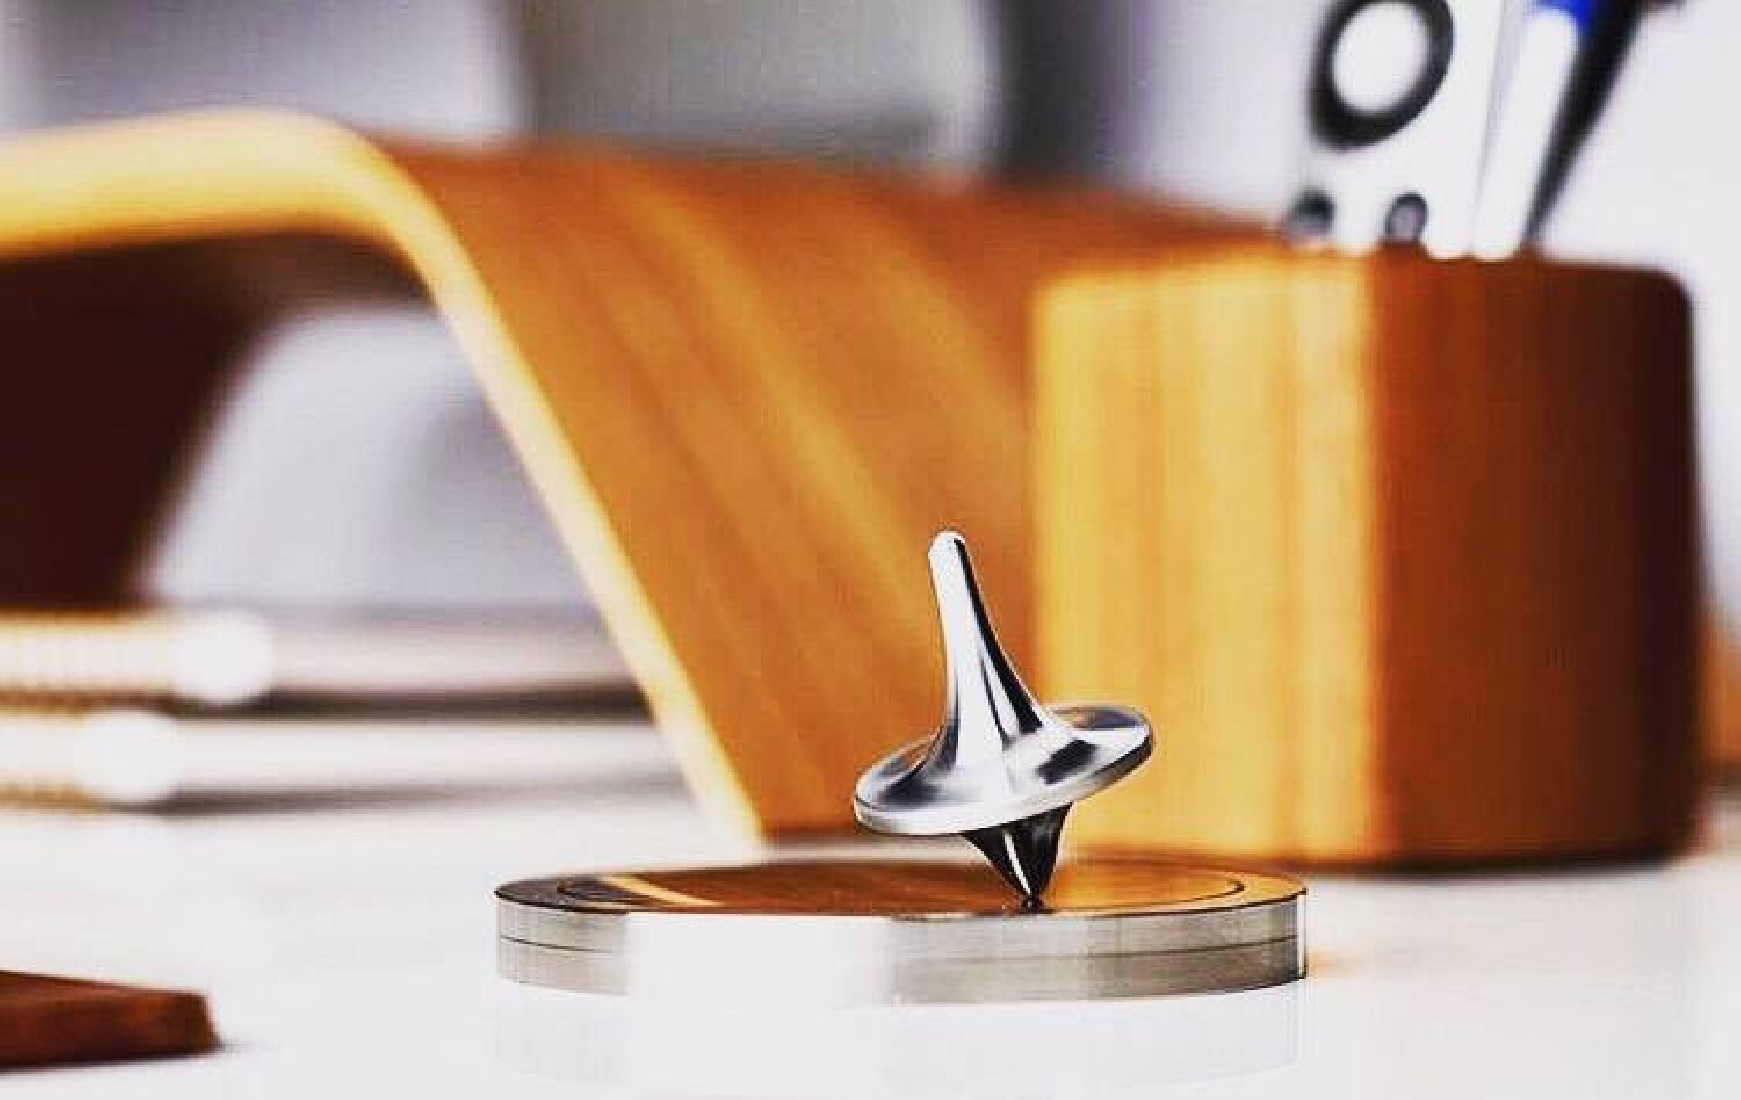 Foreverspin Stainless Steel (The original one. The simplicity is beautiful)